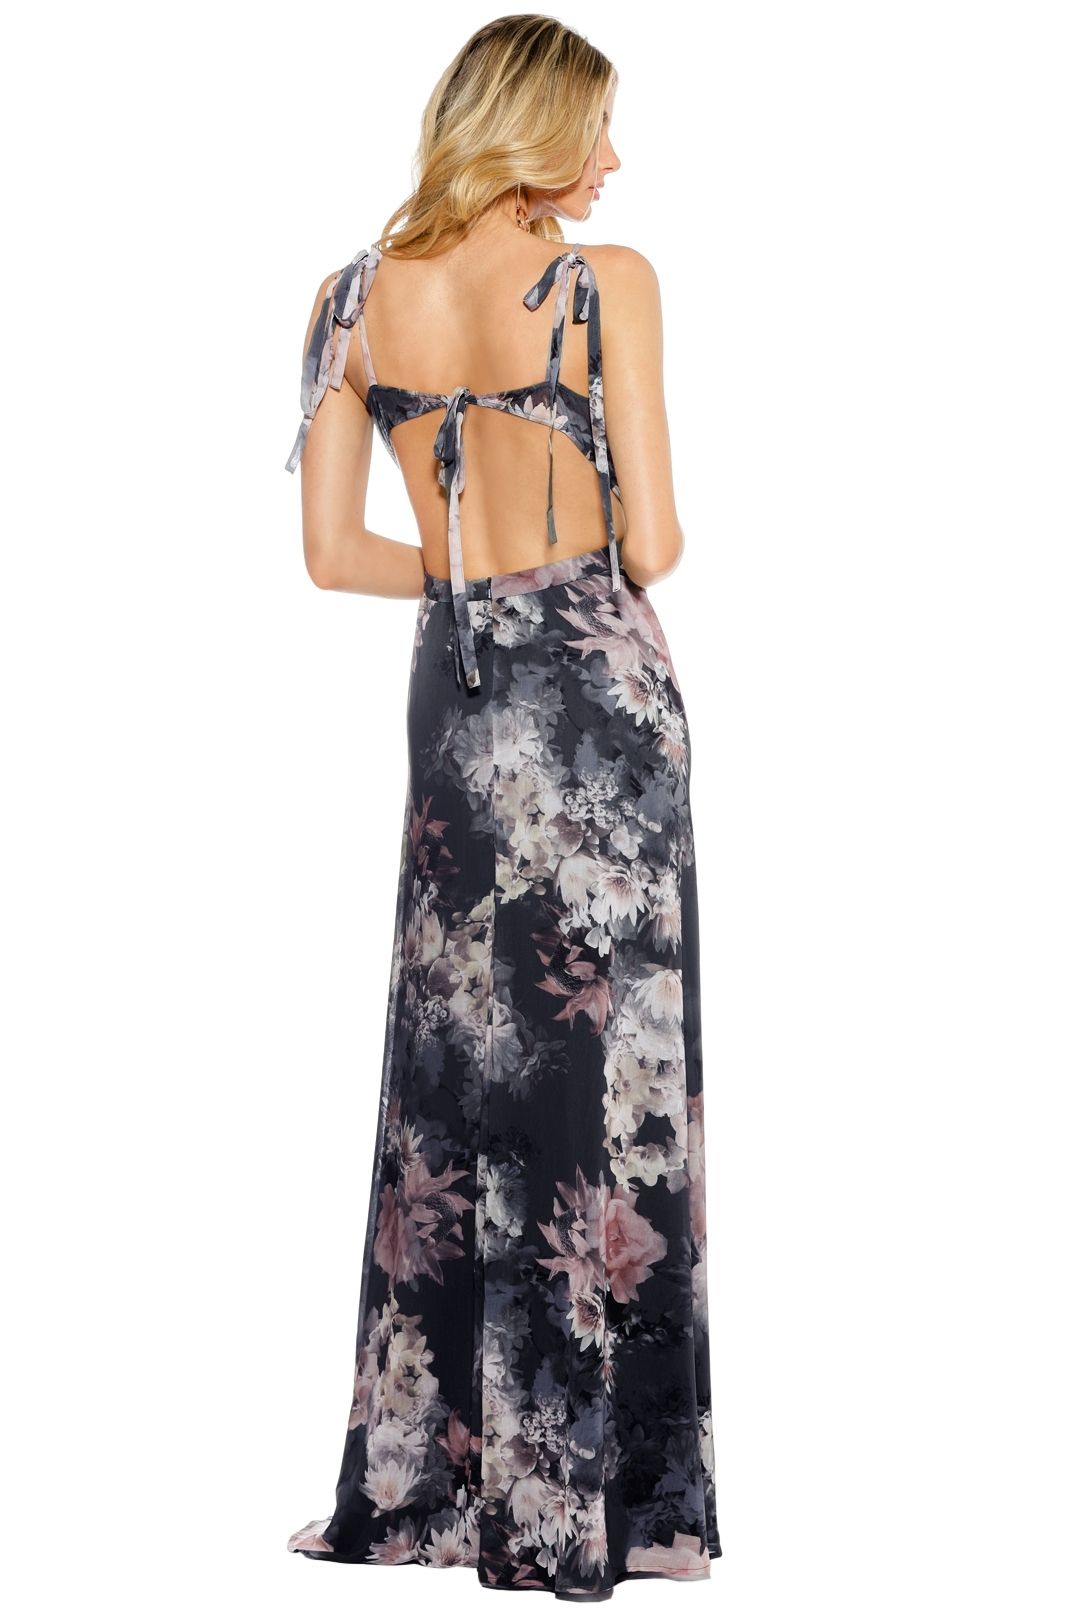 We Are Kindred - Alanah Bow Back Maxi - Floral Blue - Back